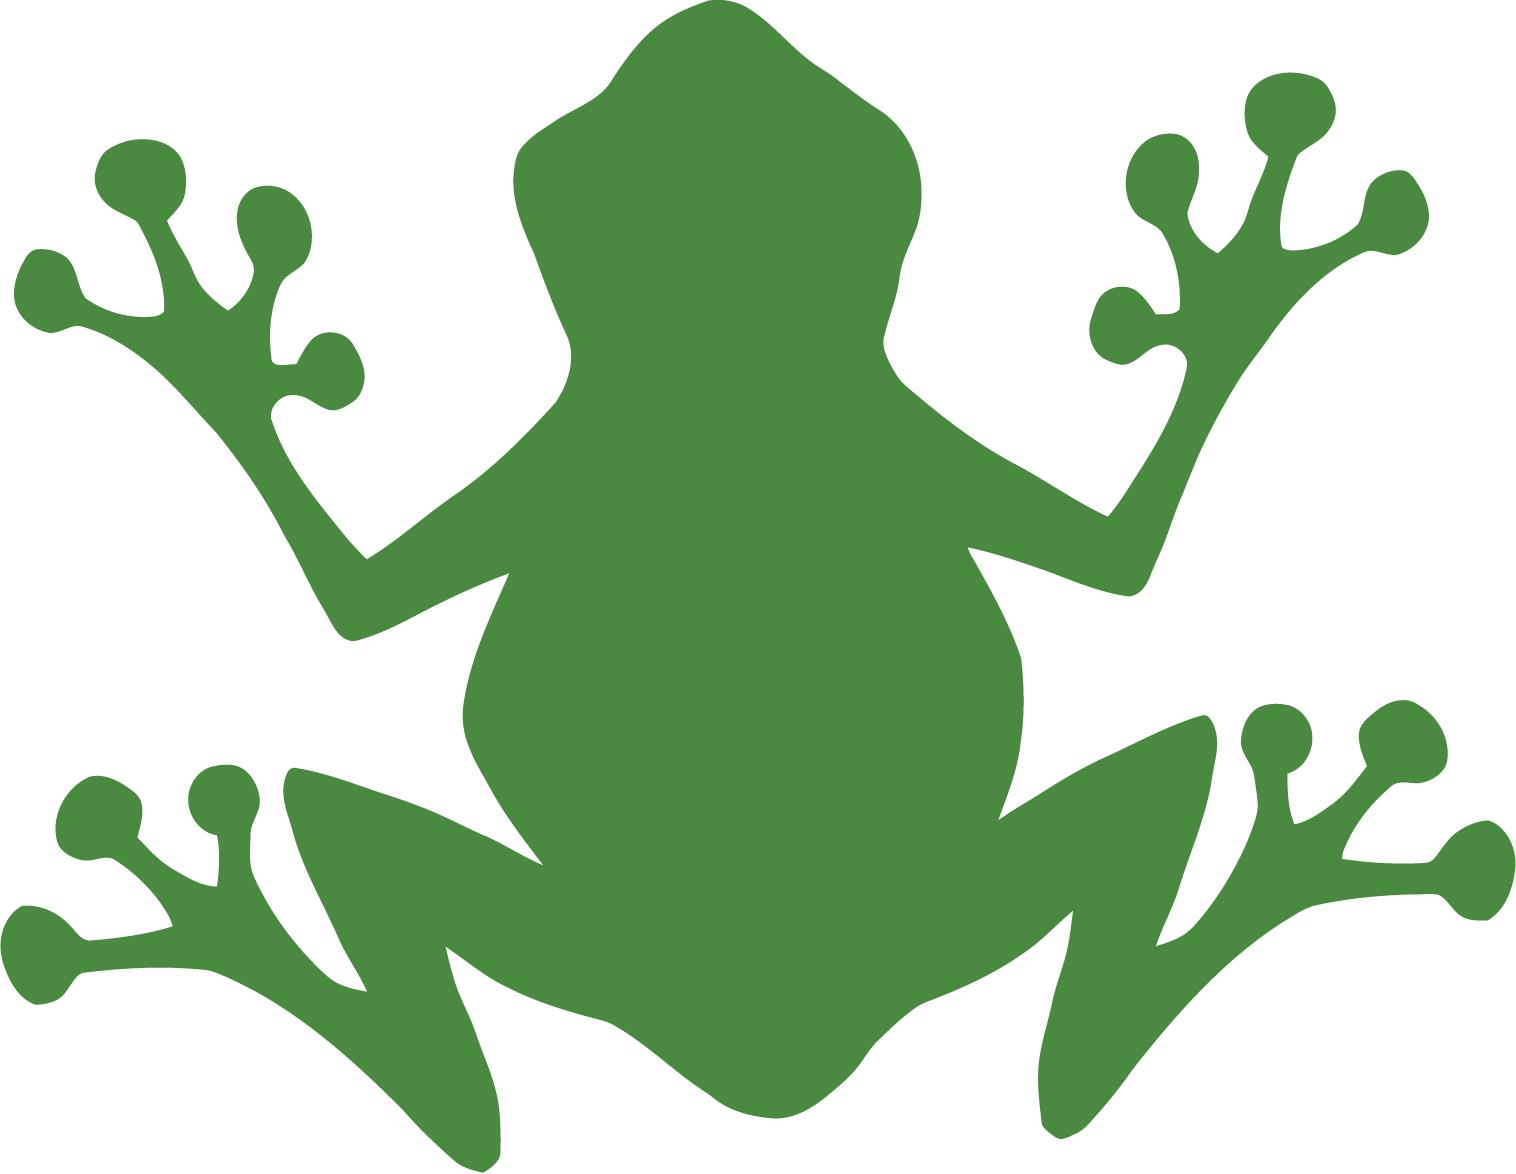 Cartoon Frog Pictures For Kids - ClipArt Best